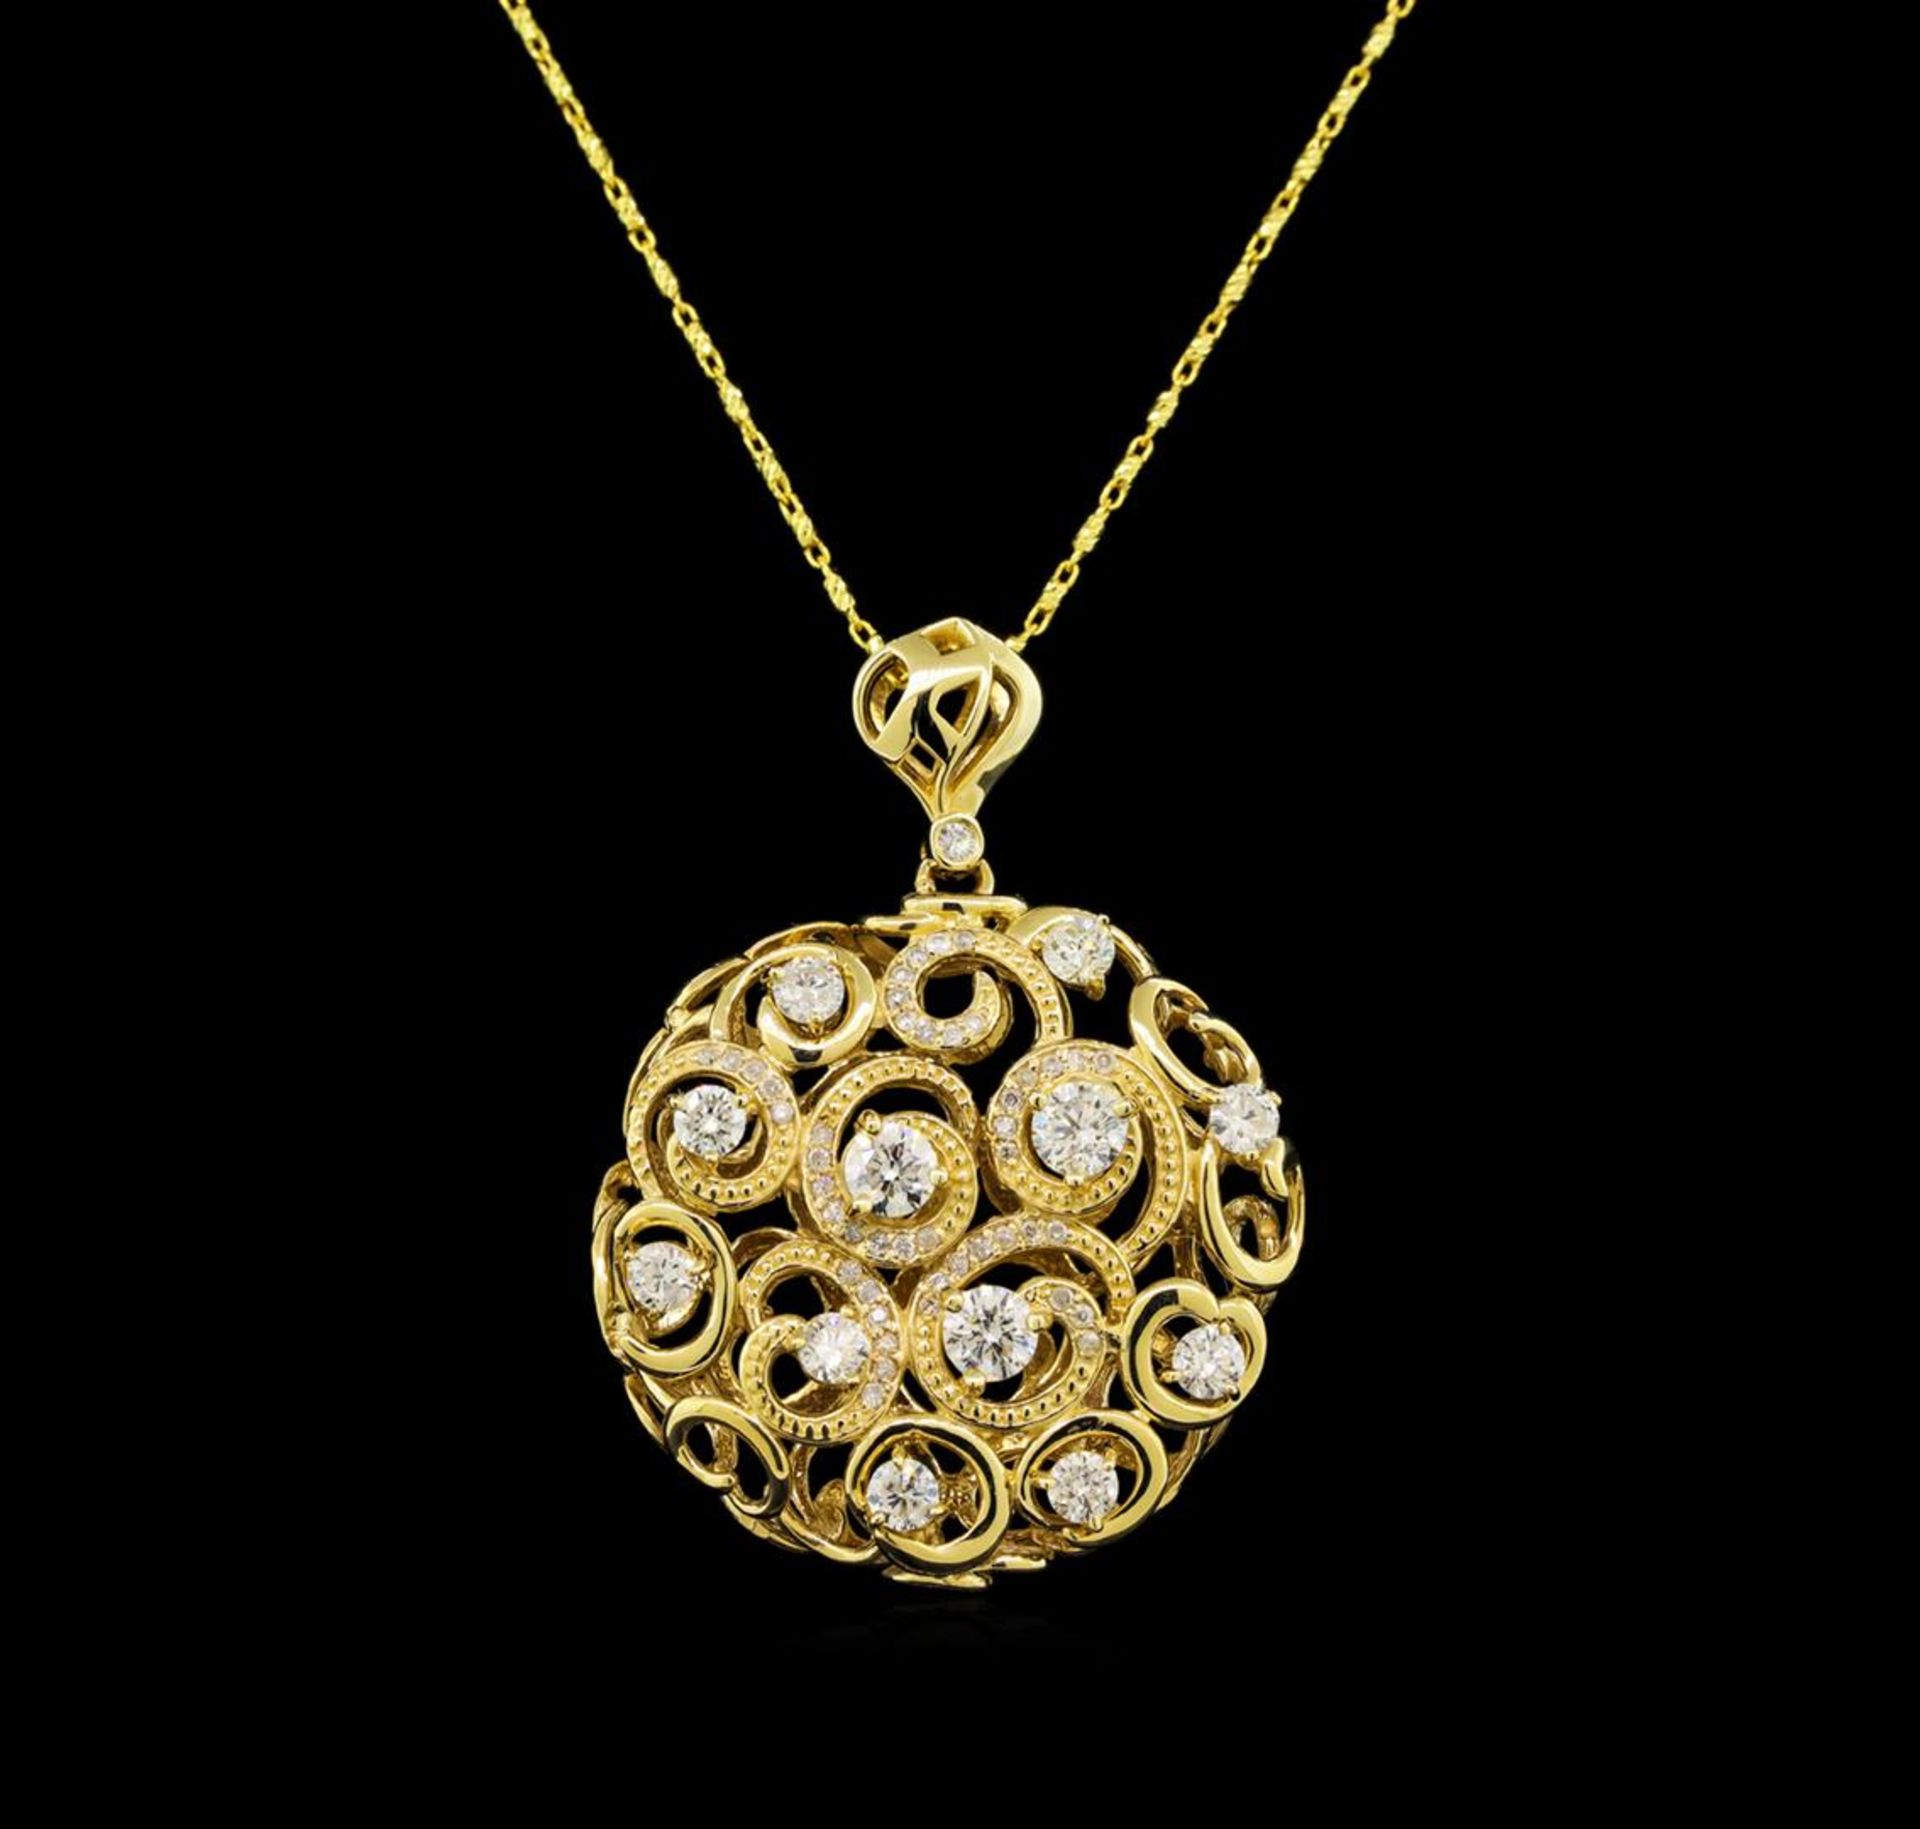 14KT Yellow Gold 1.85 ctw Diamond Pendant With Chain - Image 2 of 3